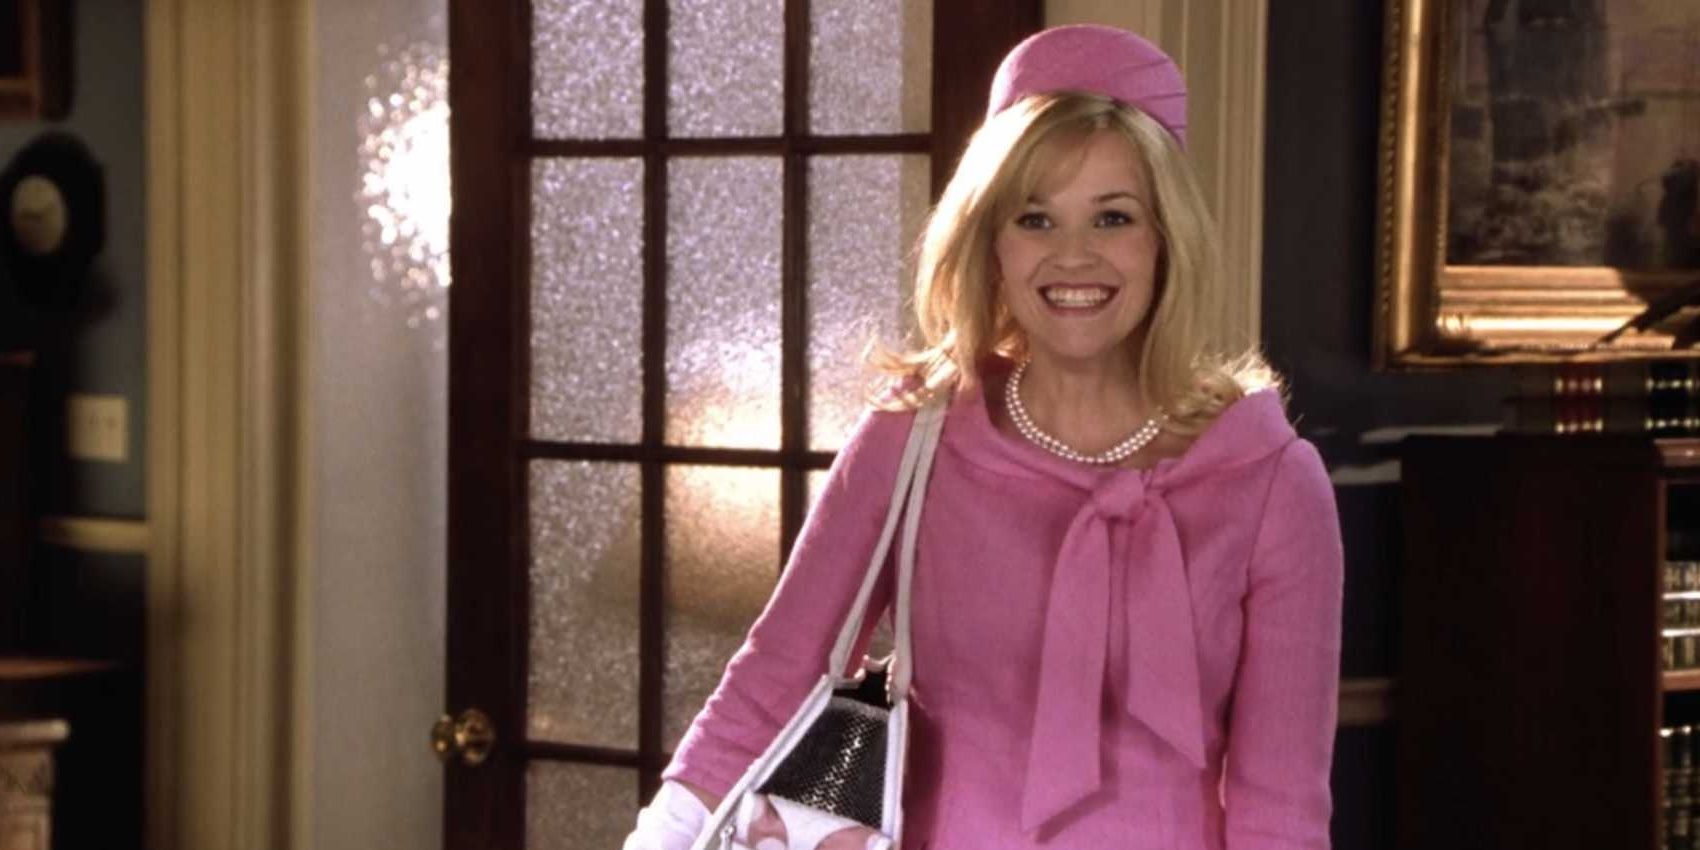 Elle Woods in an all-pink outfit smiling in Legally Blonde 2